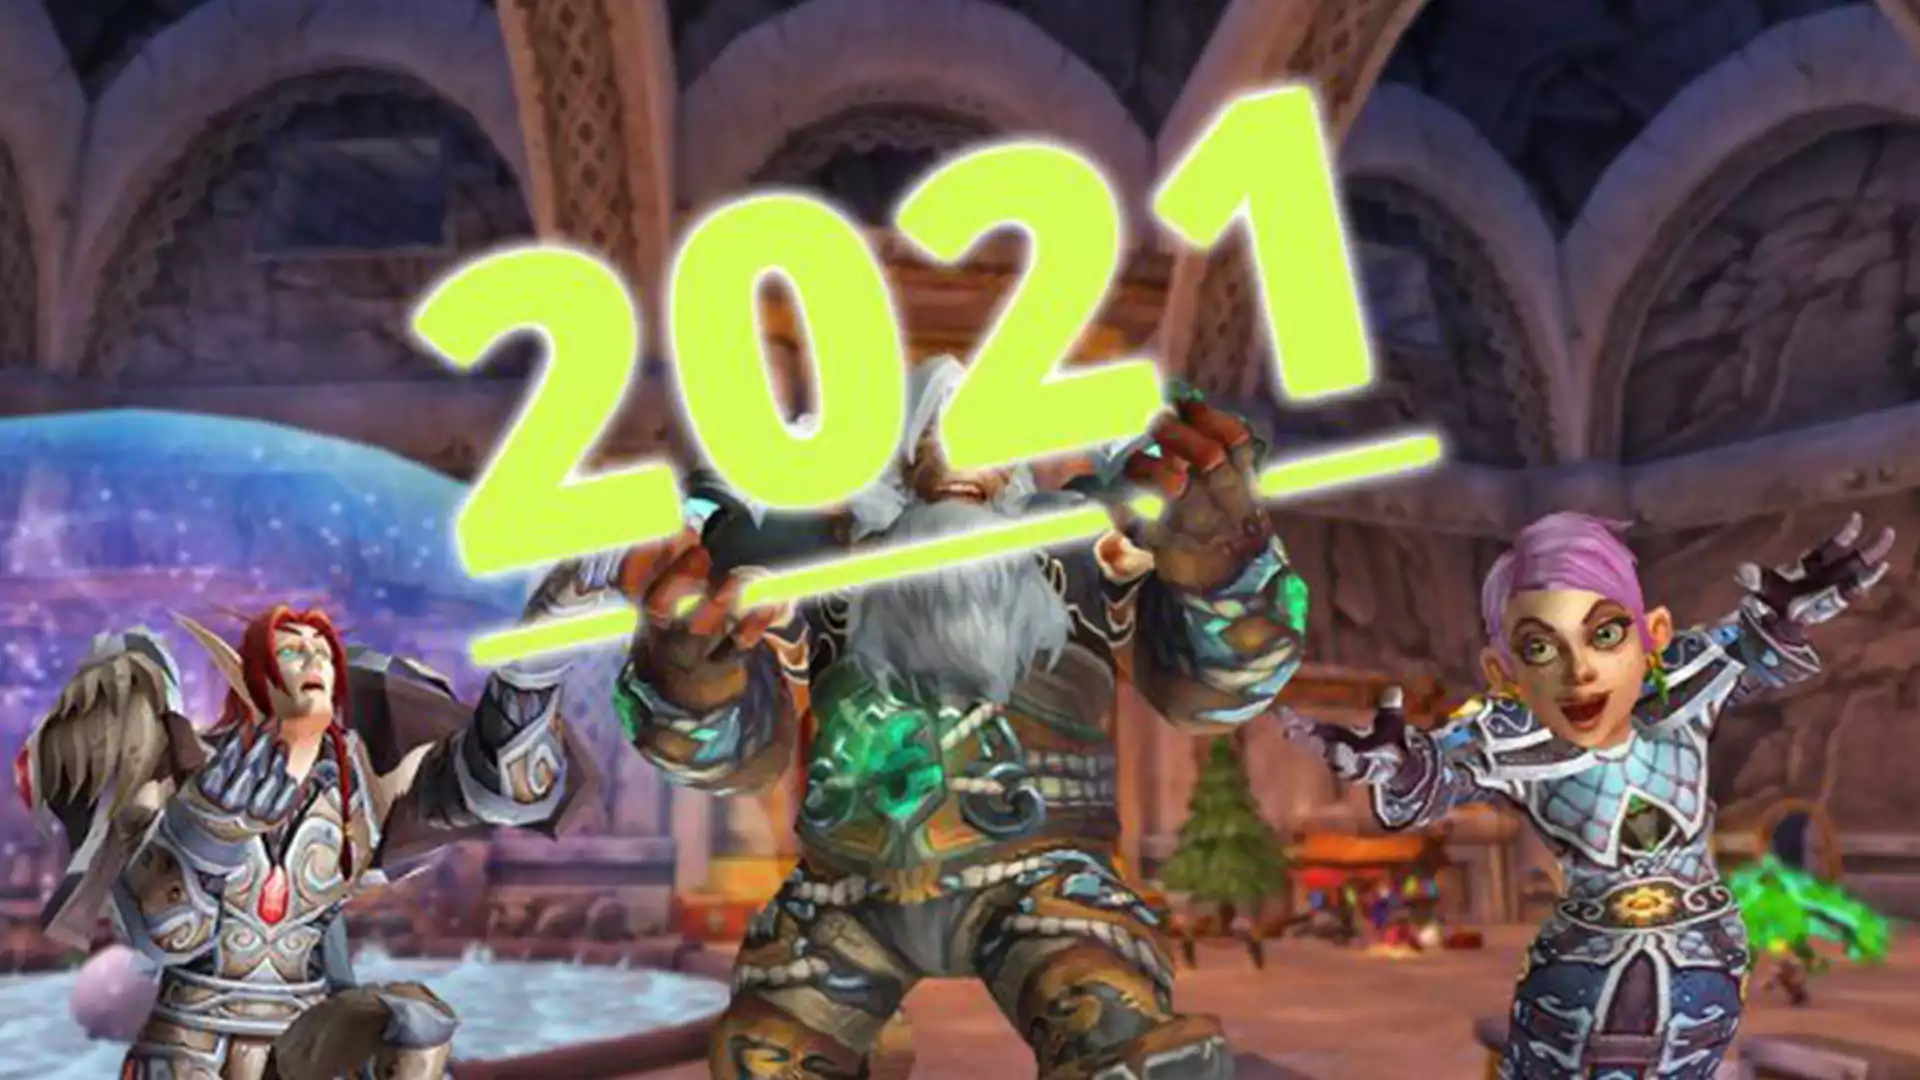 This was the year 2021 in WoW